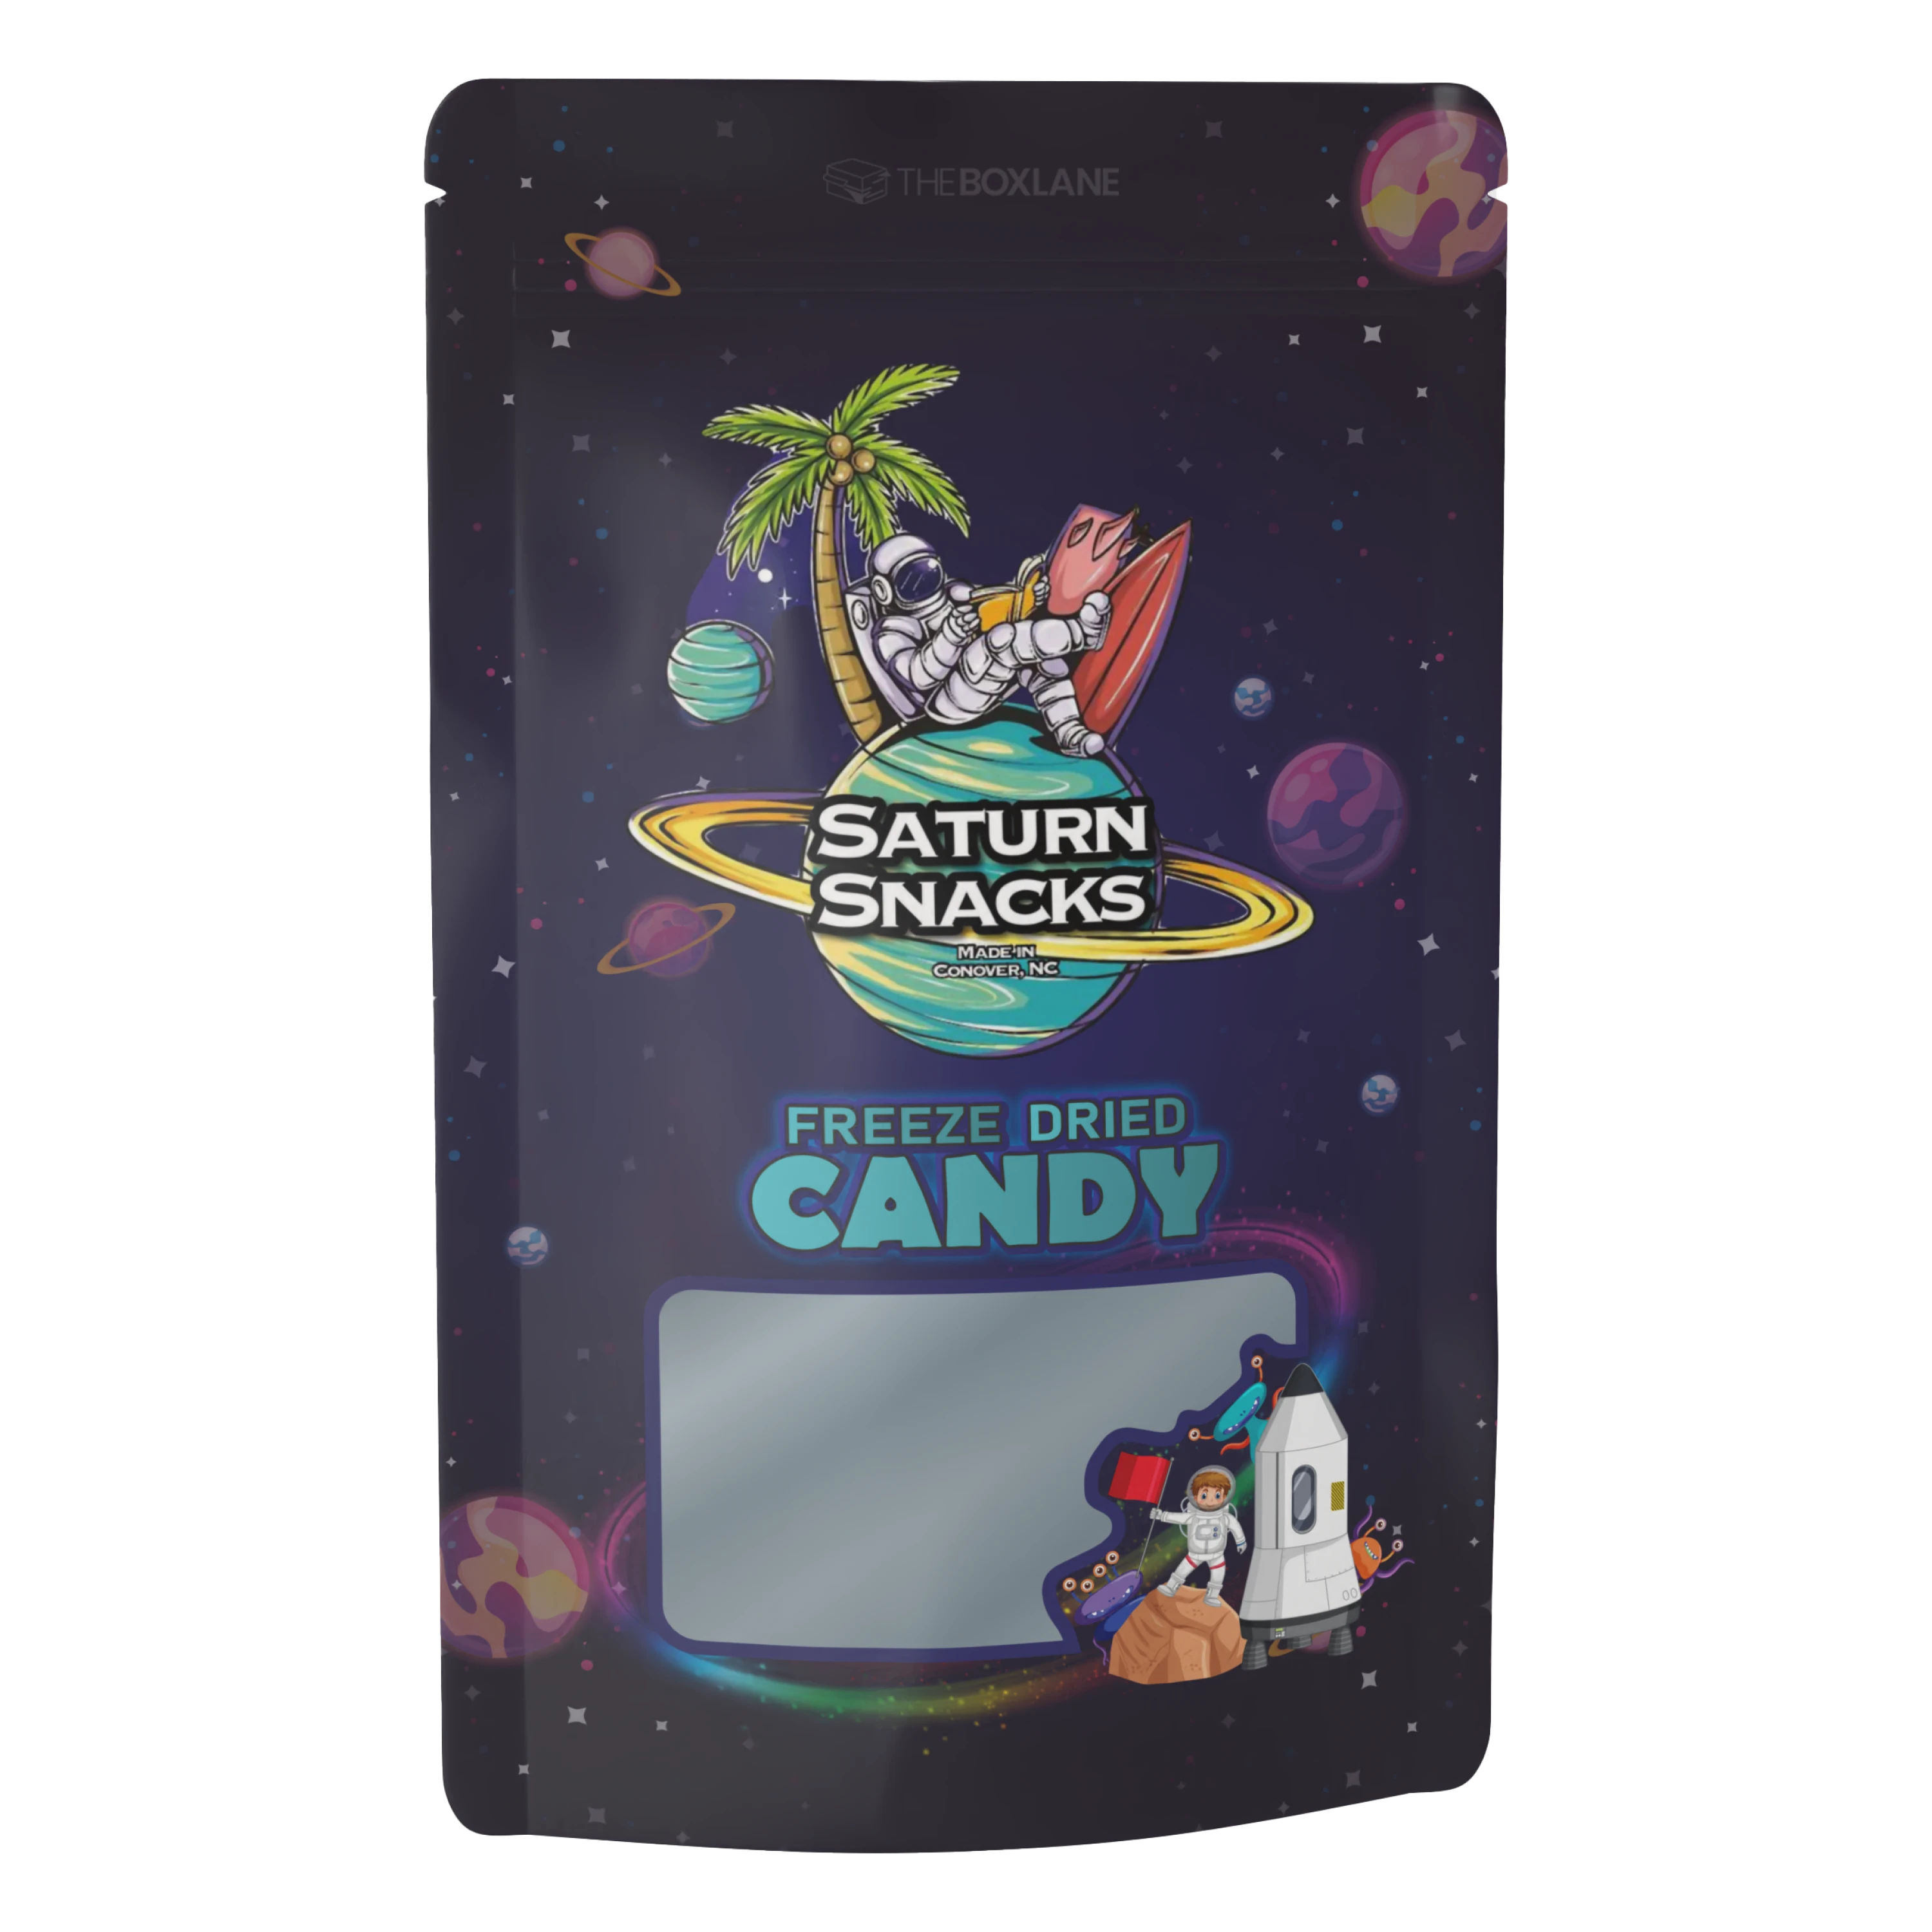 Carousel freeze dried candy packaging image 3 | The Box Lane